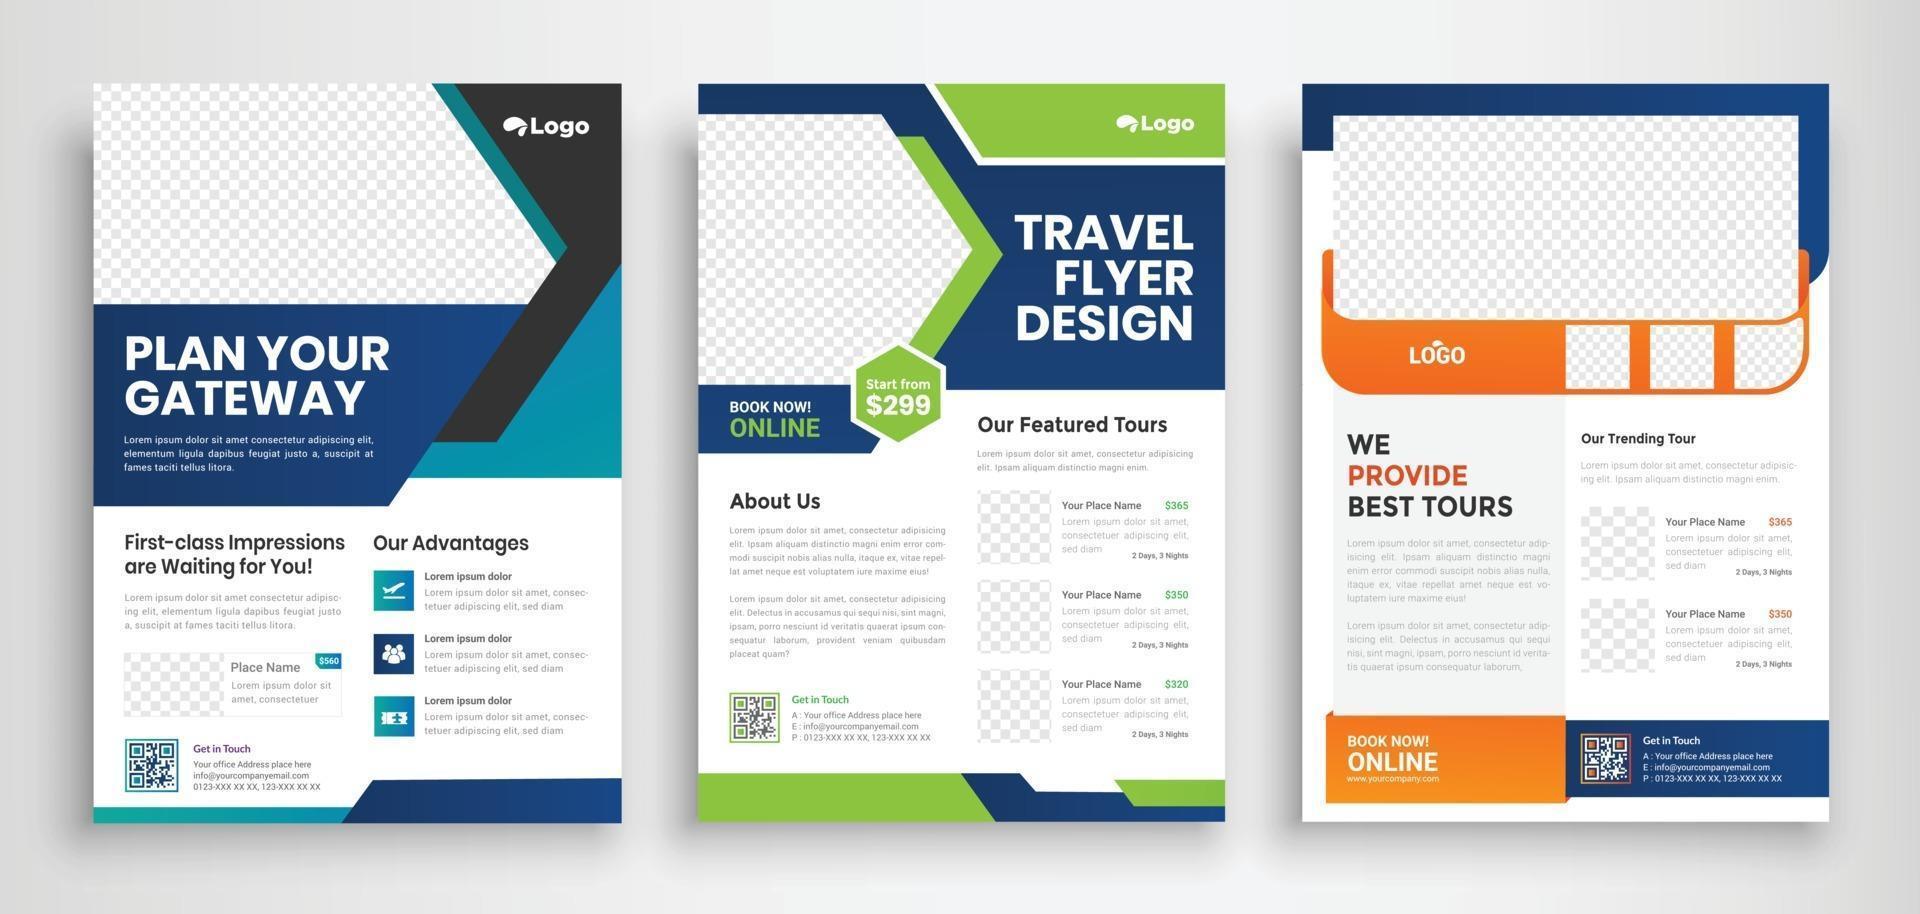 Travel flyer template design with contact and venue details vector